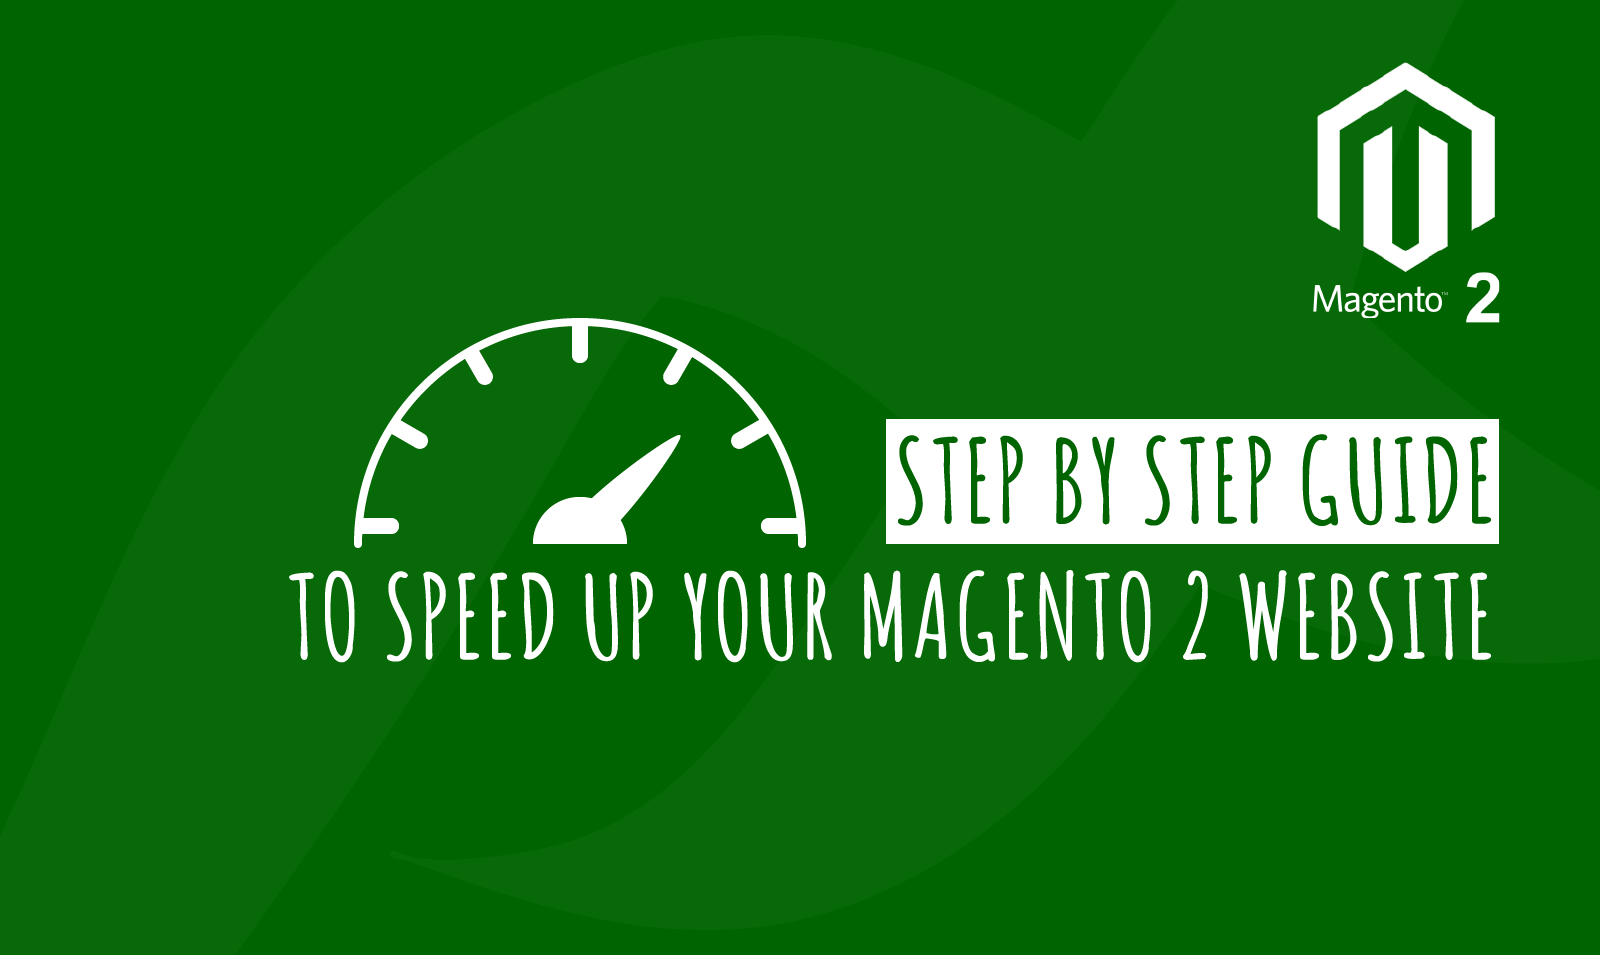 STEP BY STEP GUIDE TO SPEED UP YOUR MAGENTO 2 WEBSITE